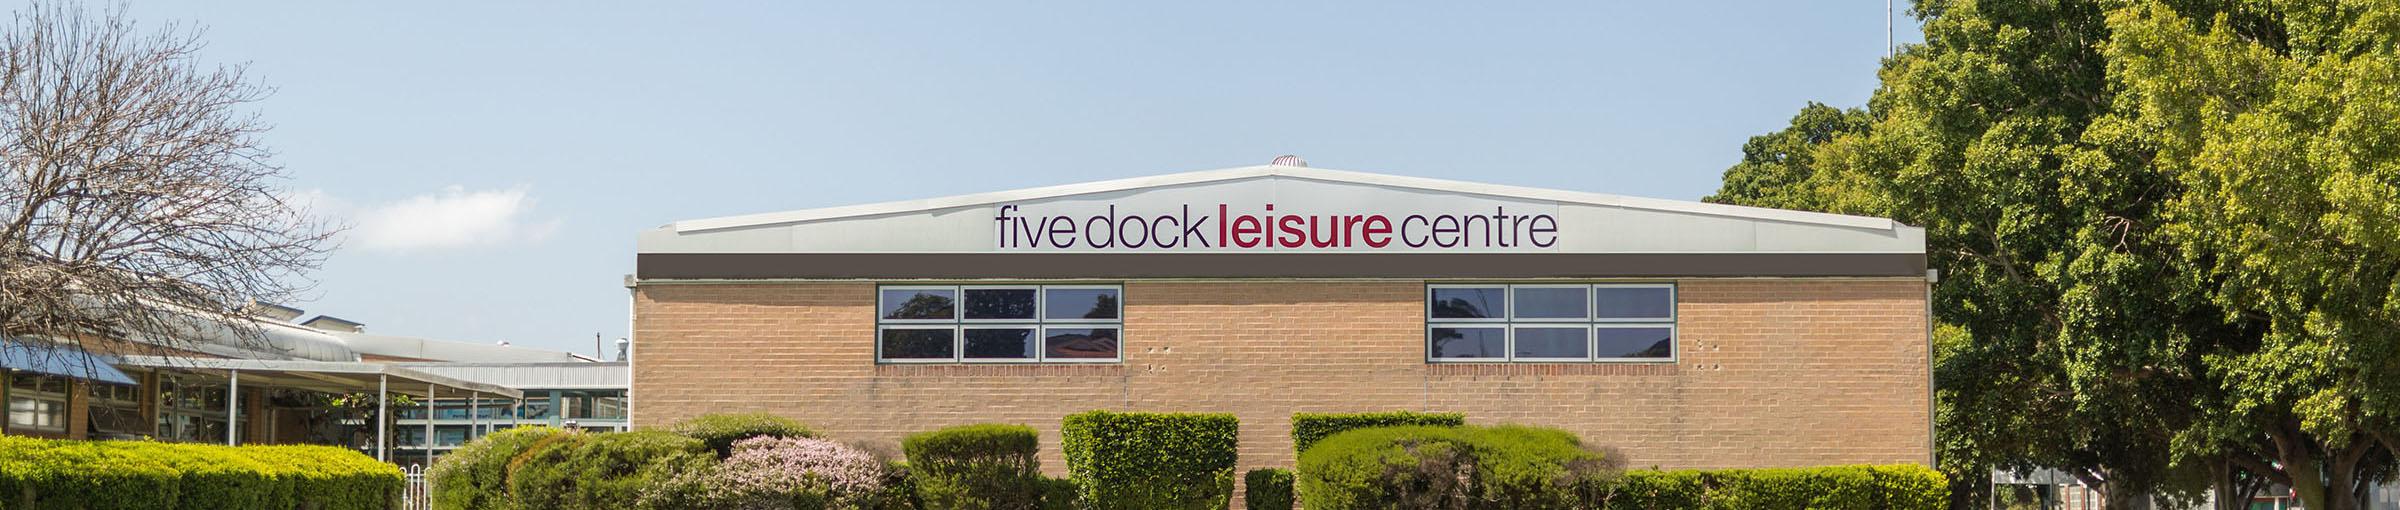 Image of Five Dock Leisure Centre building and park infront